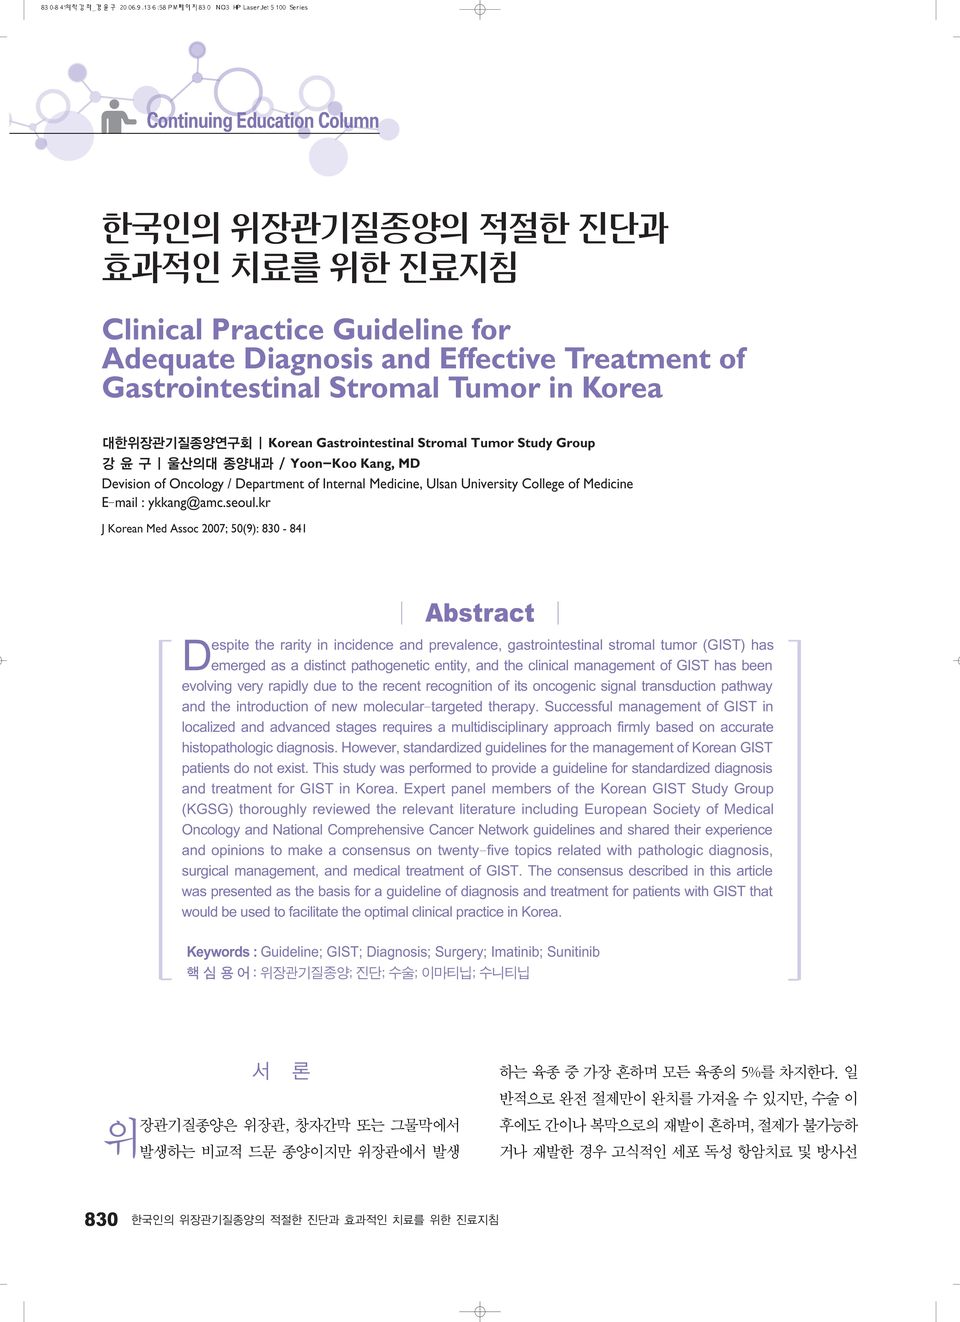 kr J Korean Med Assoc 2007; 50(9): 830-841 Abstract Despite the rarity in incidence and prevalence, gastrointestinal stromal tumor (GIST) has emerged as a distinct pathogenetic entity, and the